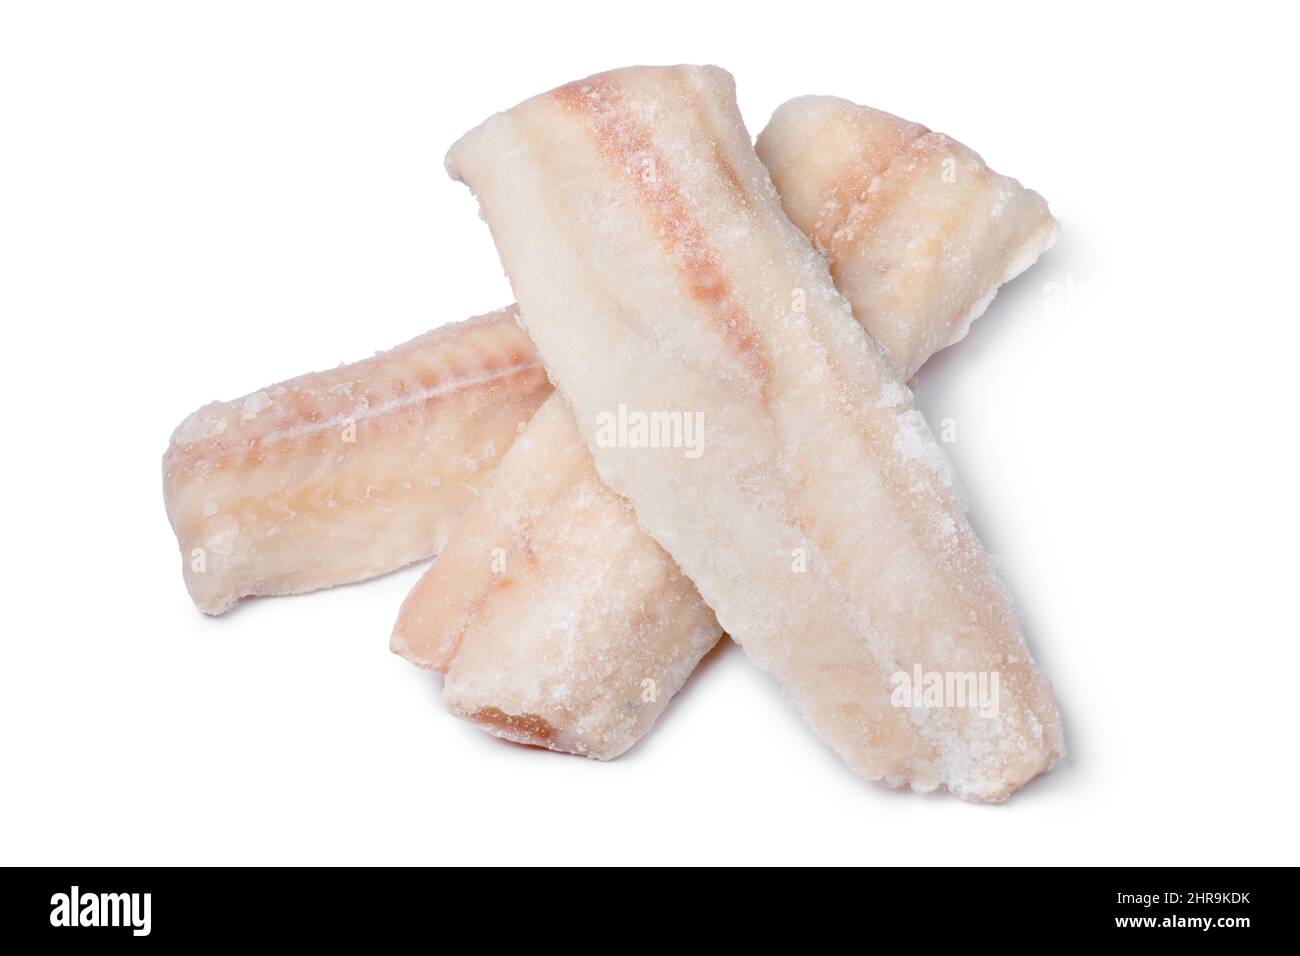 Pieces of frozen pollock fish isolated on white background Stock Photo